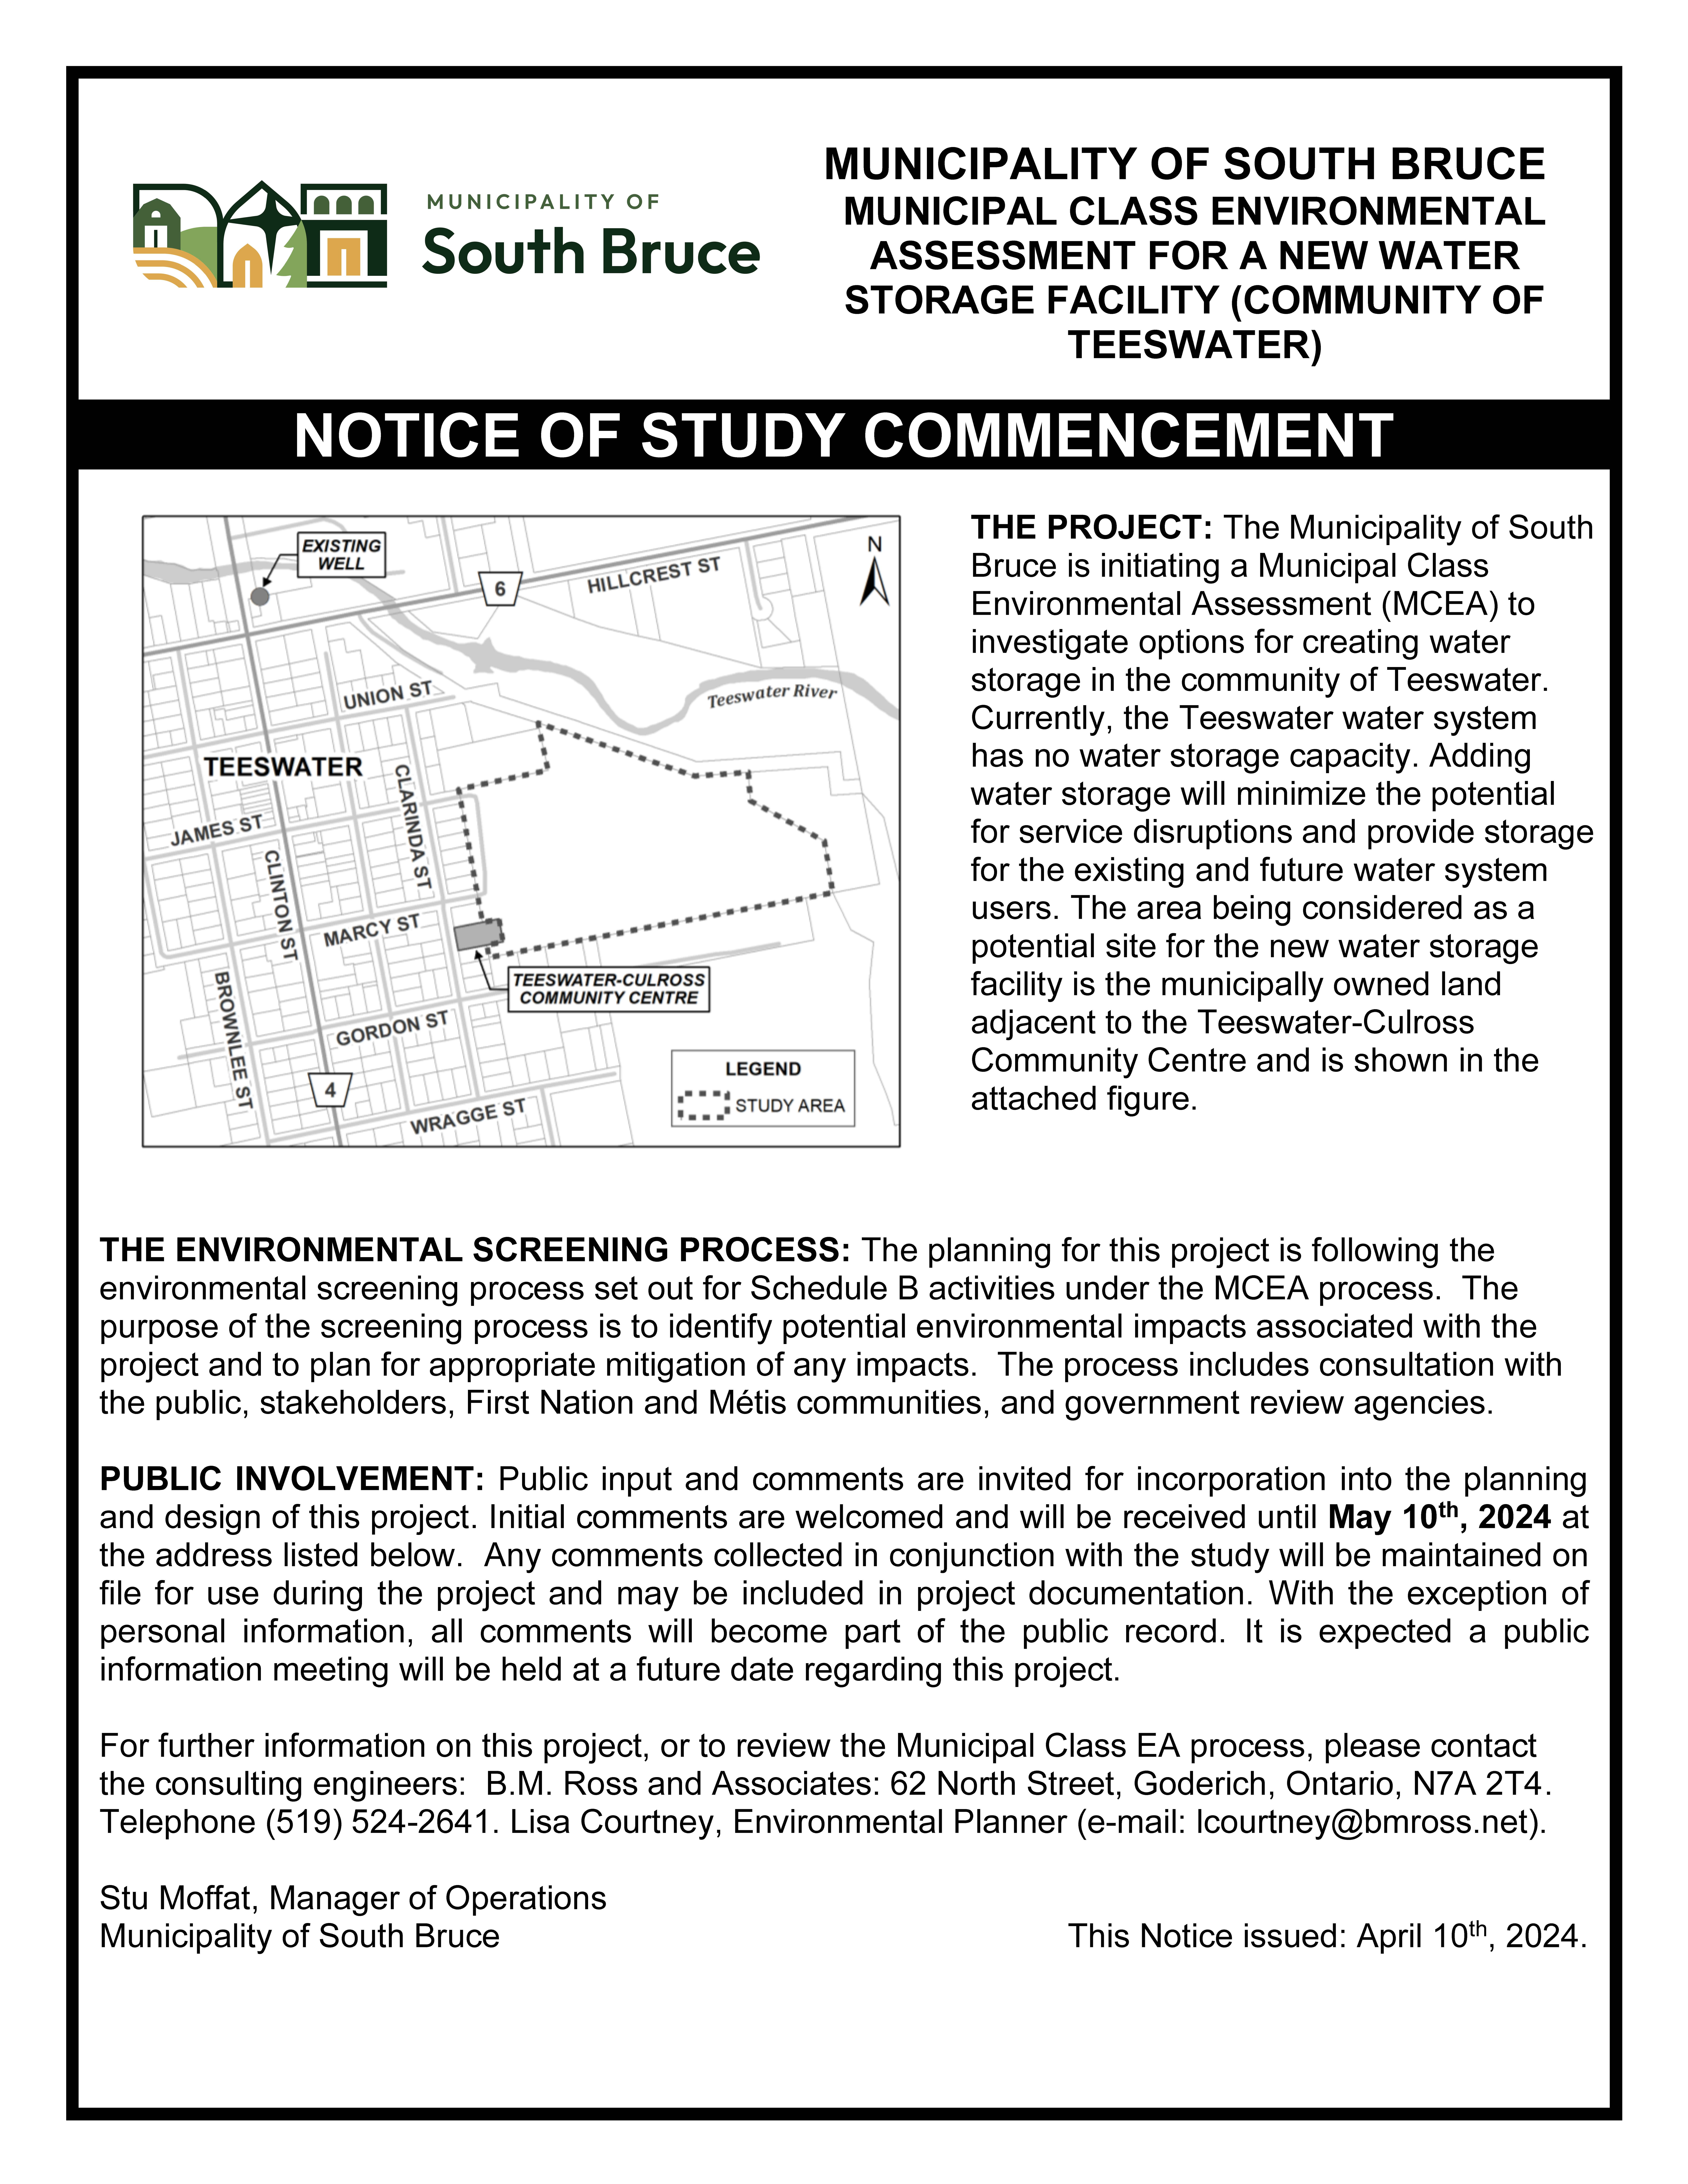 Image of Notice of Study Commencement for the Municipal Class Environmental Assessment for a New Water Storage Facility for Teeswater